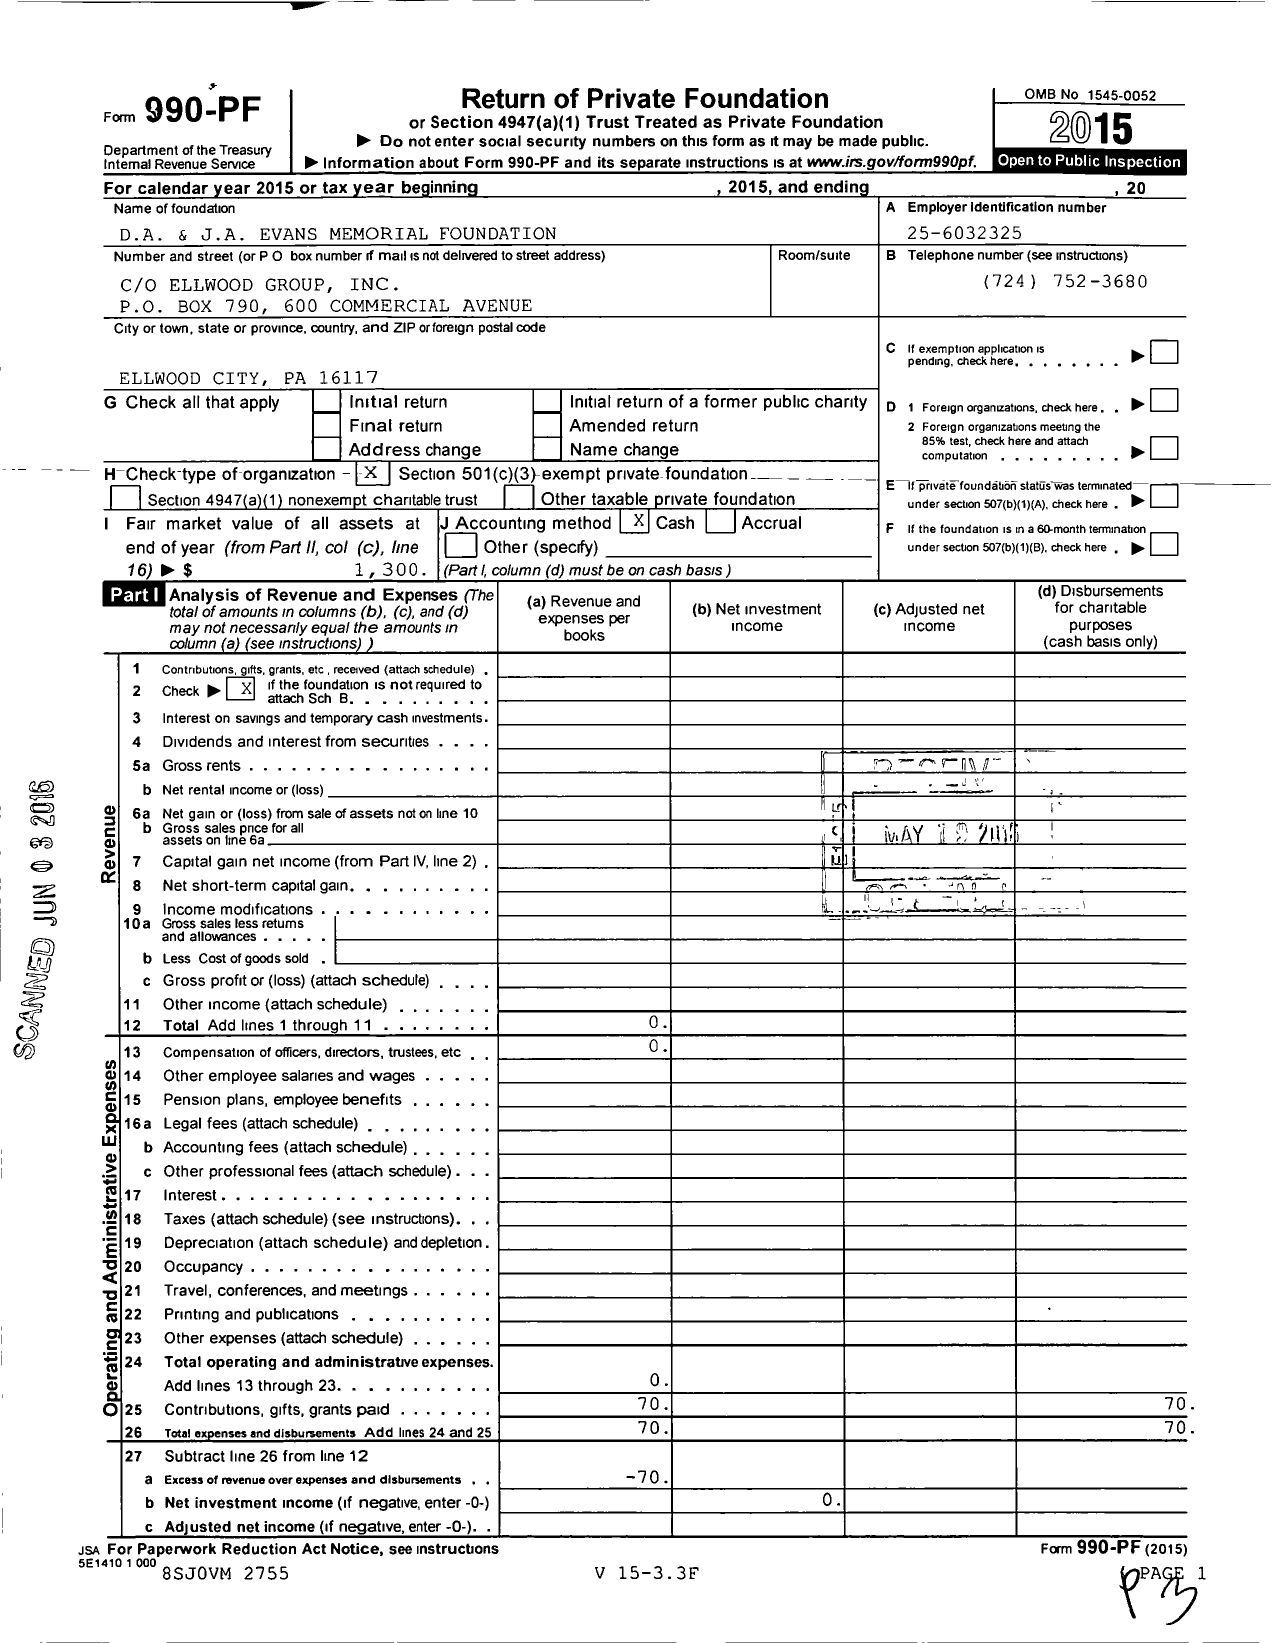 Image of first page of 2015 Form 990PF for Da and Ja Evans Memorial Foundation